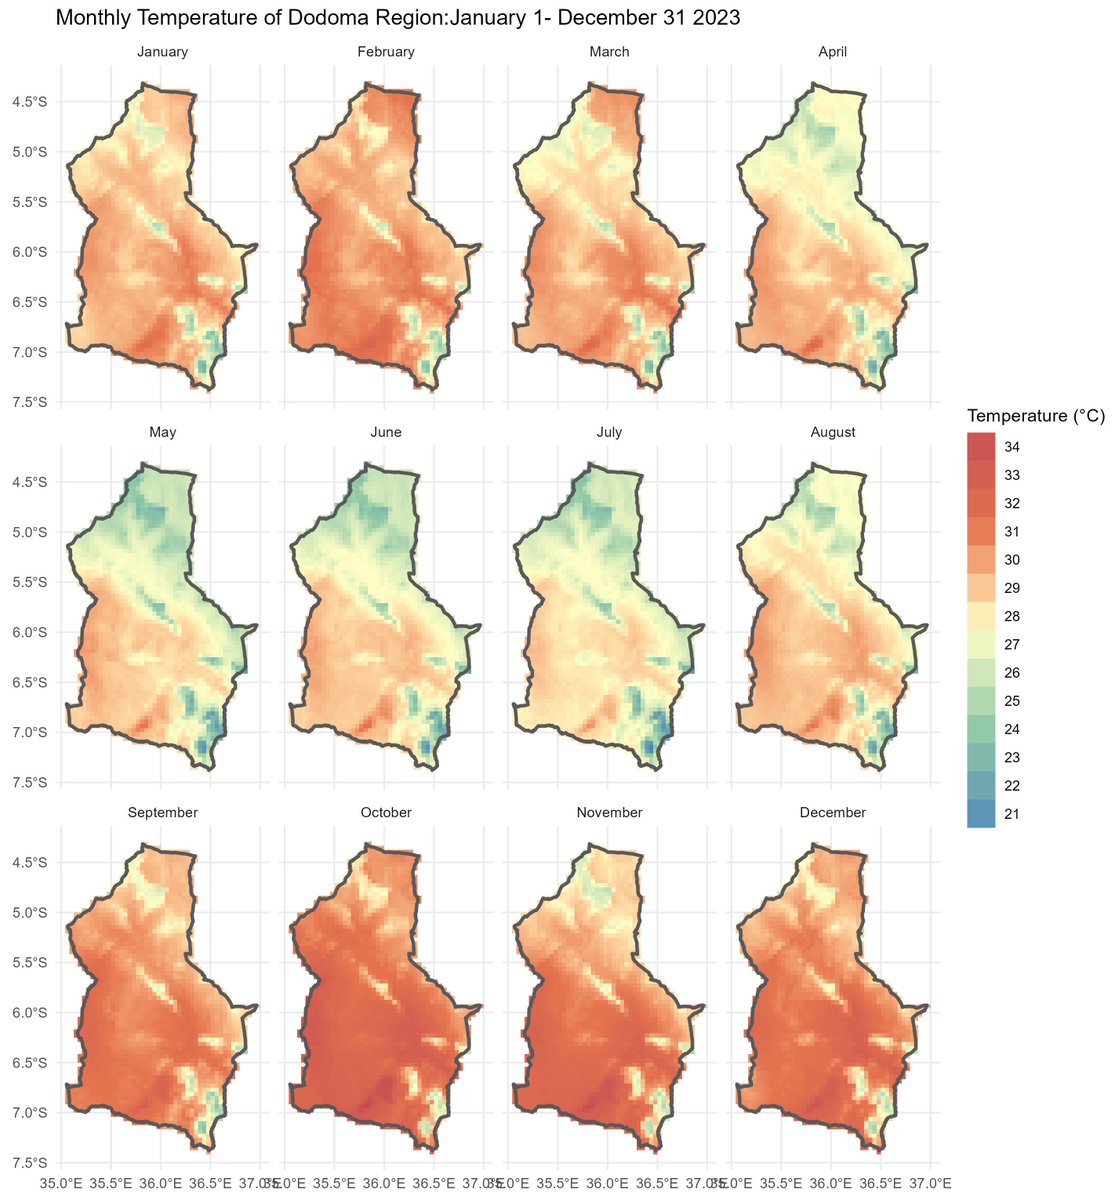 Rainfall and temperature maps are crucial for decision-making. These maps provide insights into when to plant, irrigate, and harvest, ensuring optimal crop yields and resource management. @tzagriculture #rclimate  #Agriculture #ClimateData, Thanks to @725Hemeed  for the Tutorial